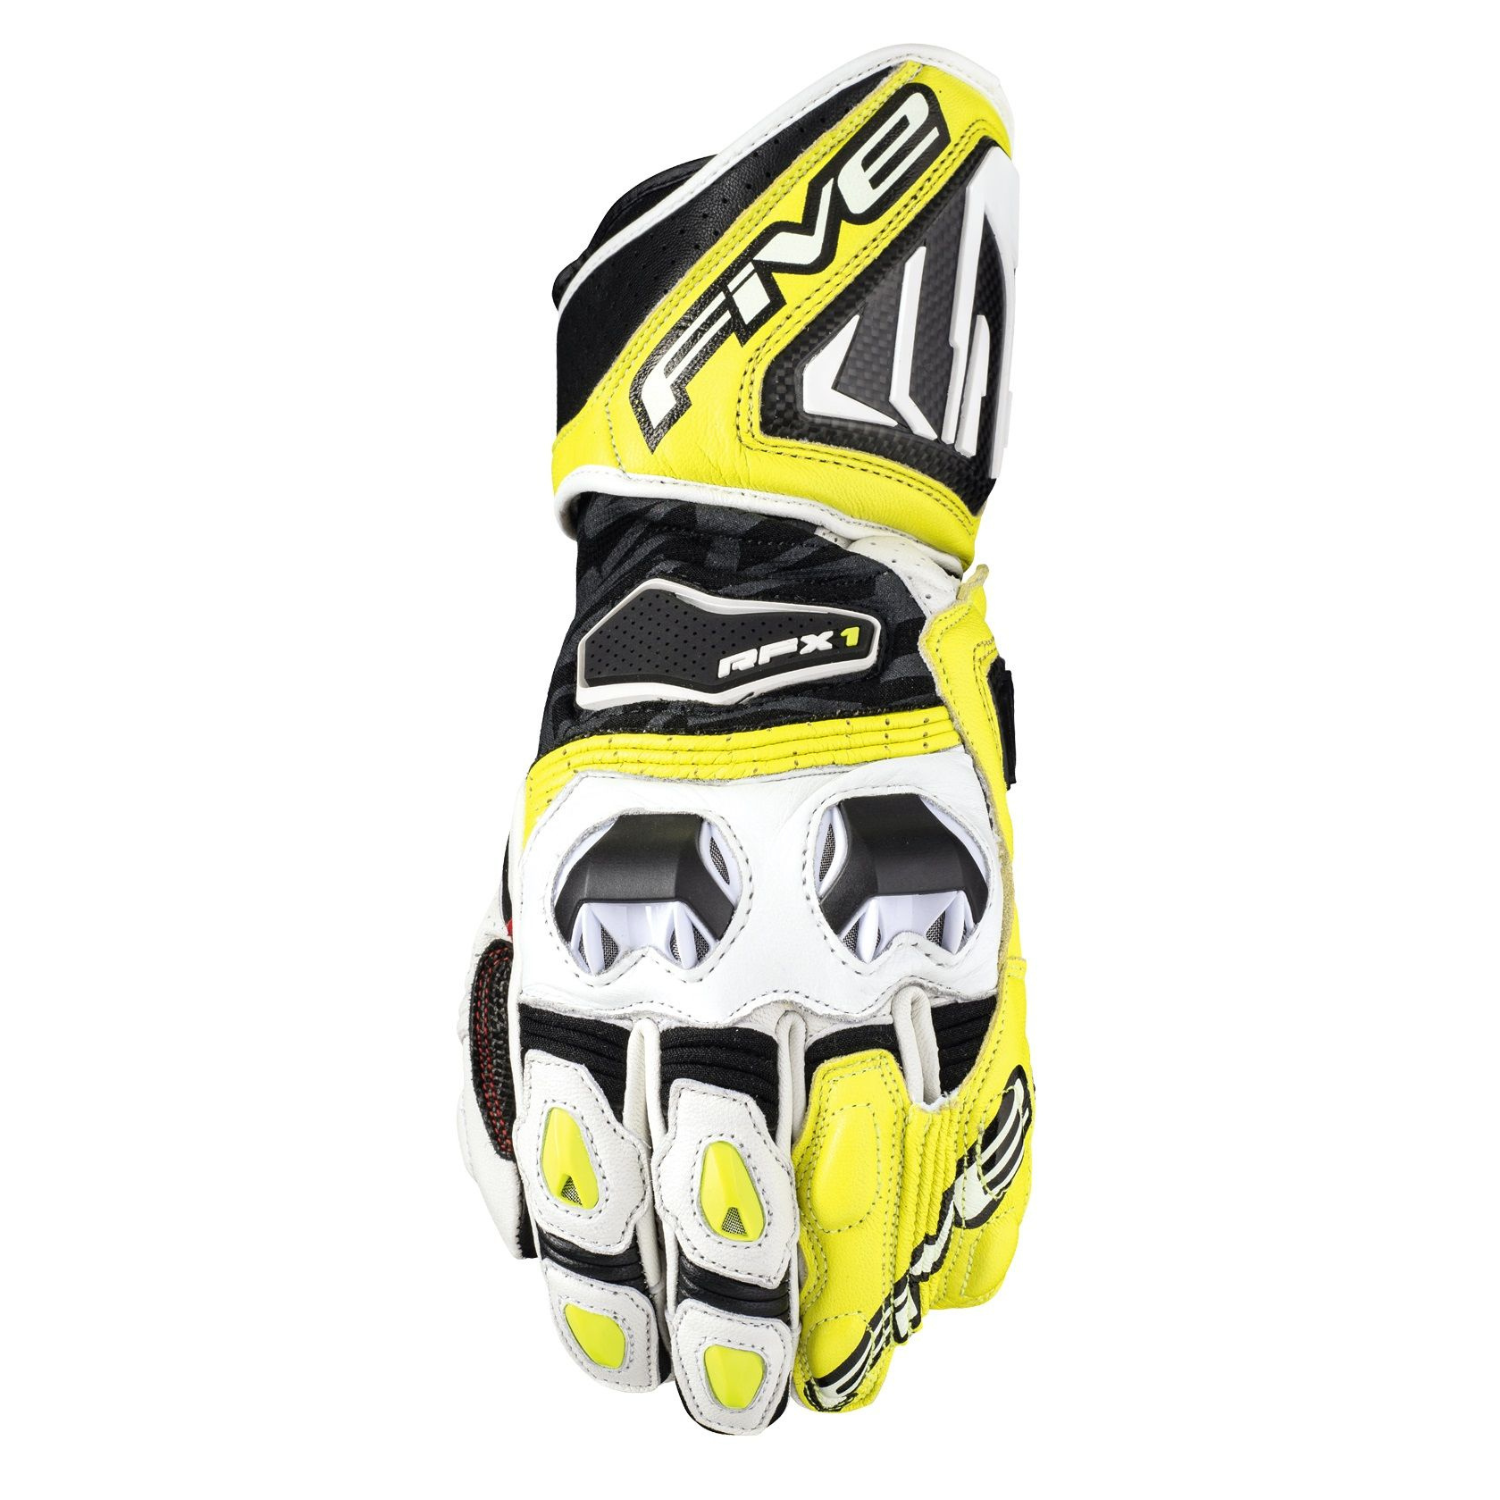 Image of Five RFX1 Gloves White Yellow Size 2XL ID 3882020012754